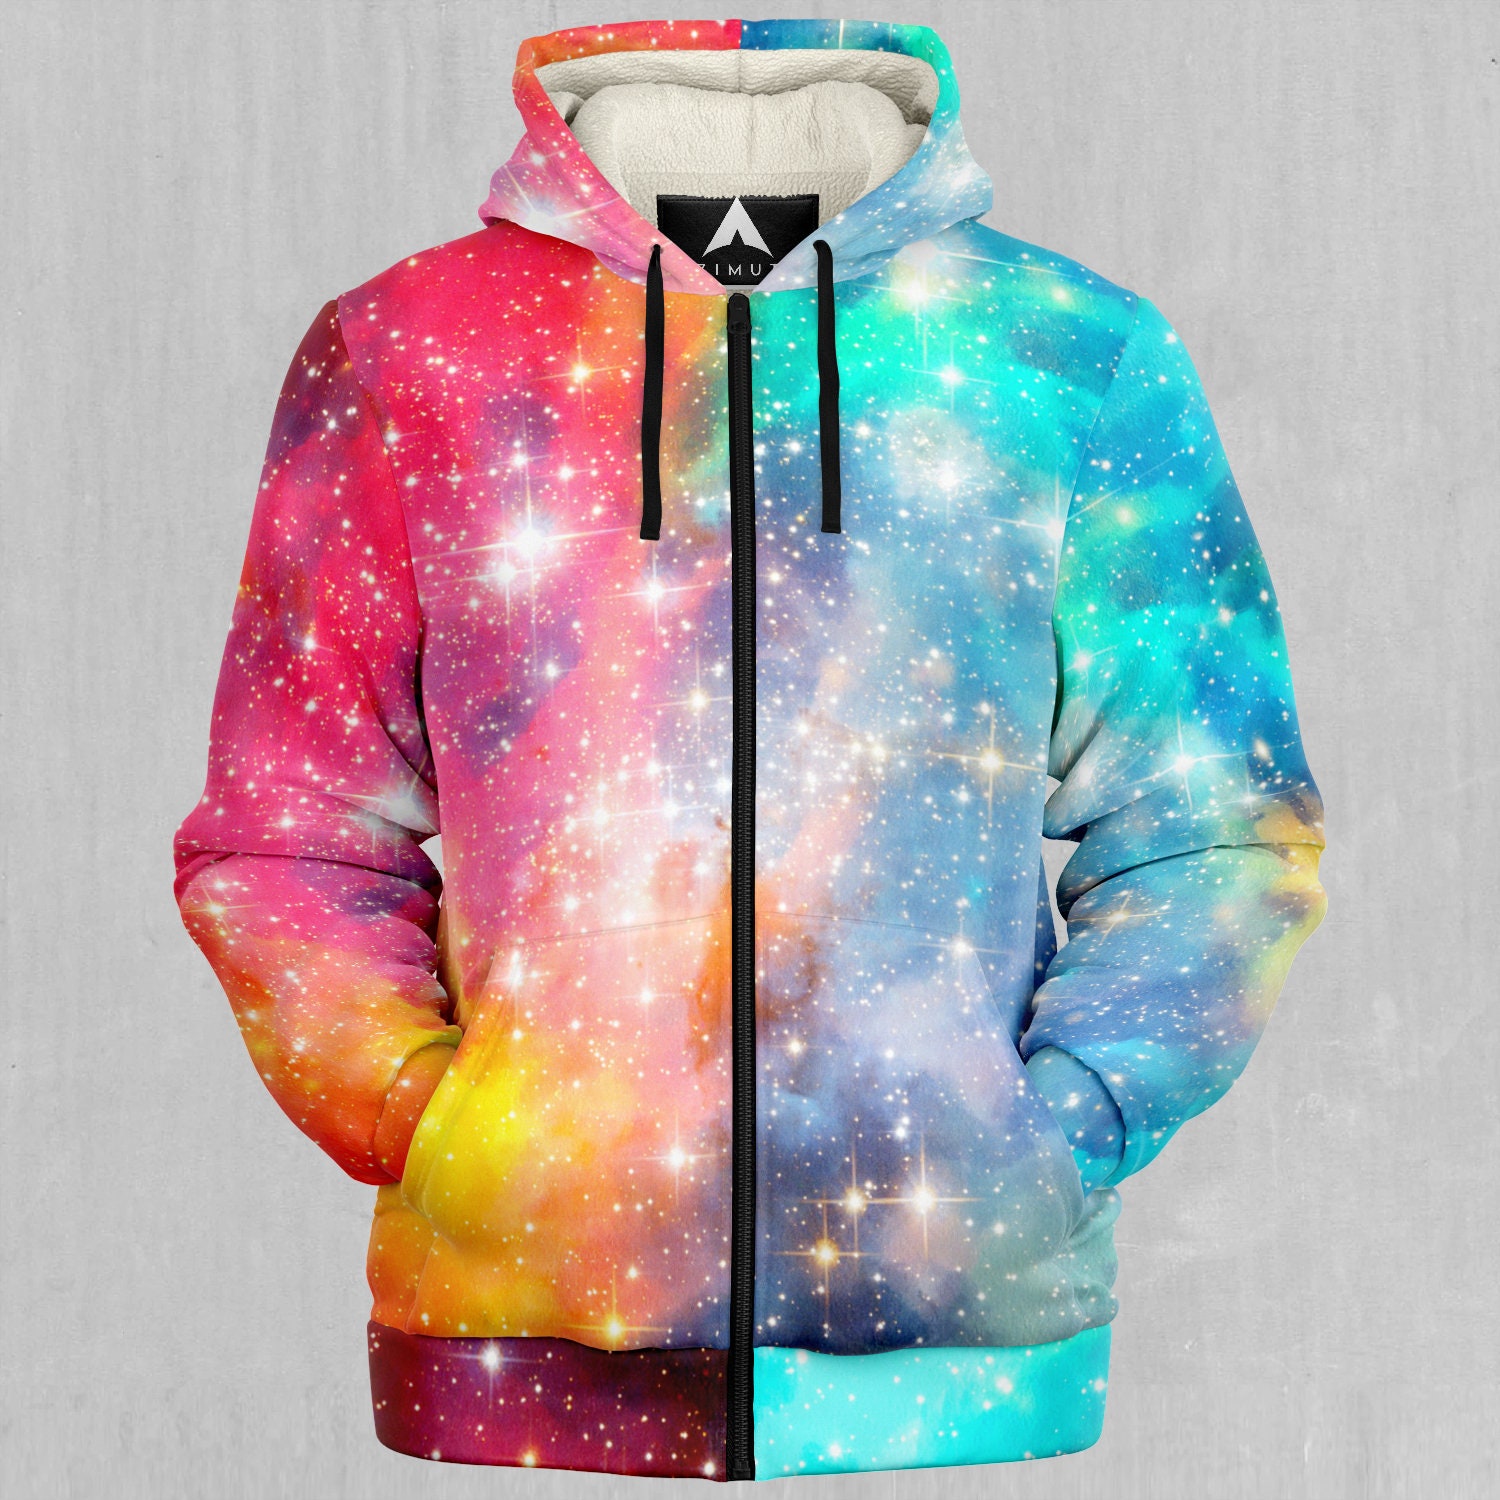 Discover Fire and Ice Galaxy Outer Space Nebula Abstract Sherpa Microfleece Zip-Up Hoodie